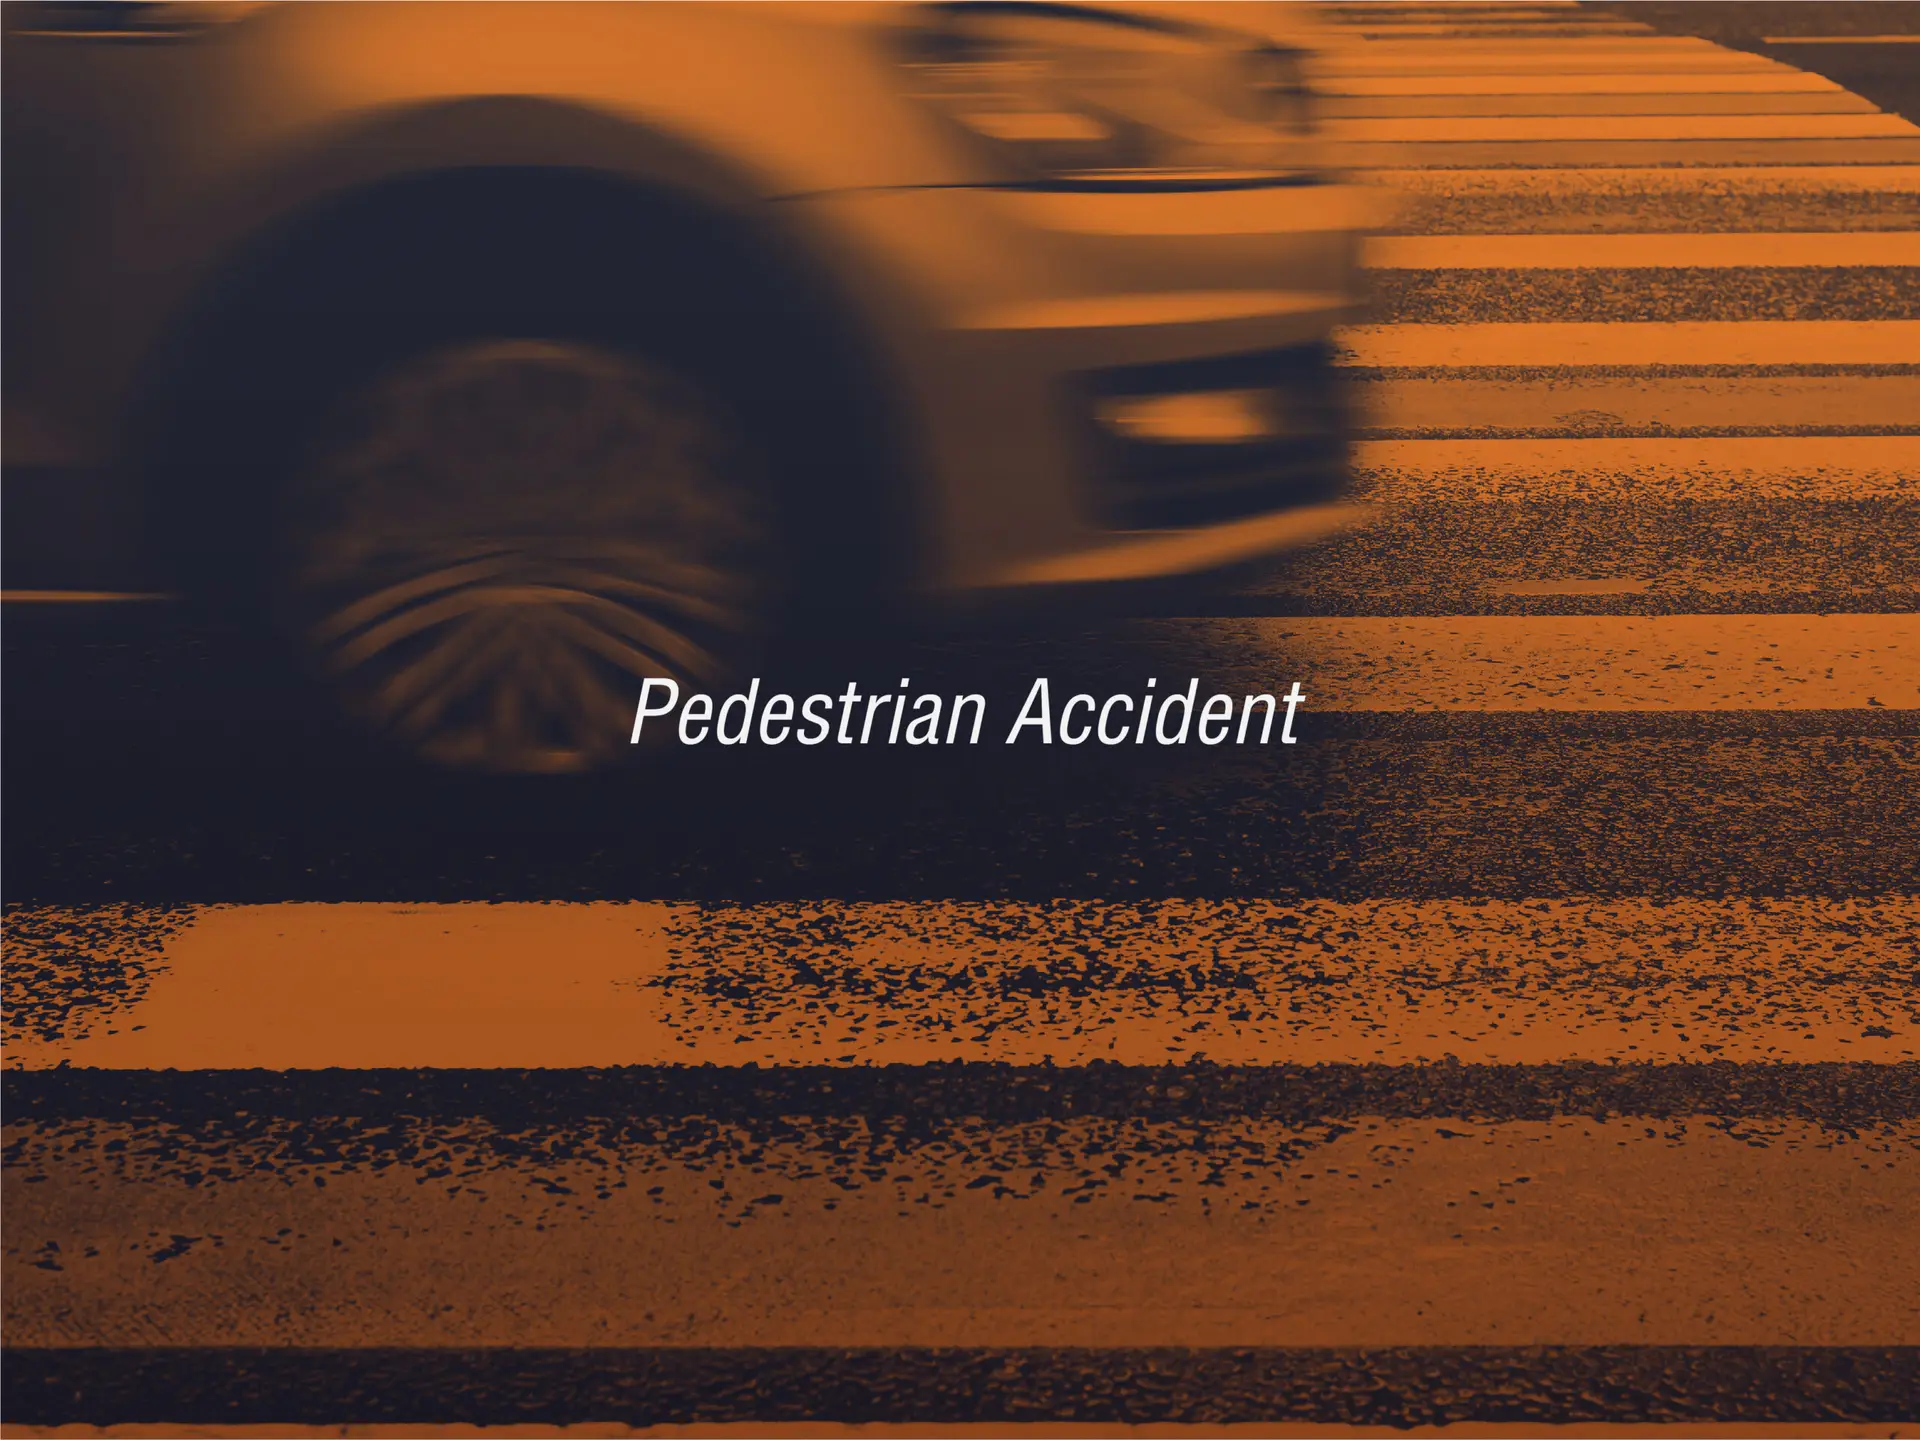 California pedestrian accident lawyers